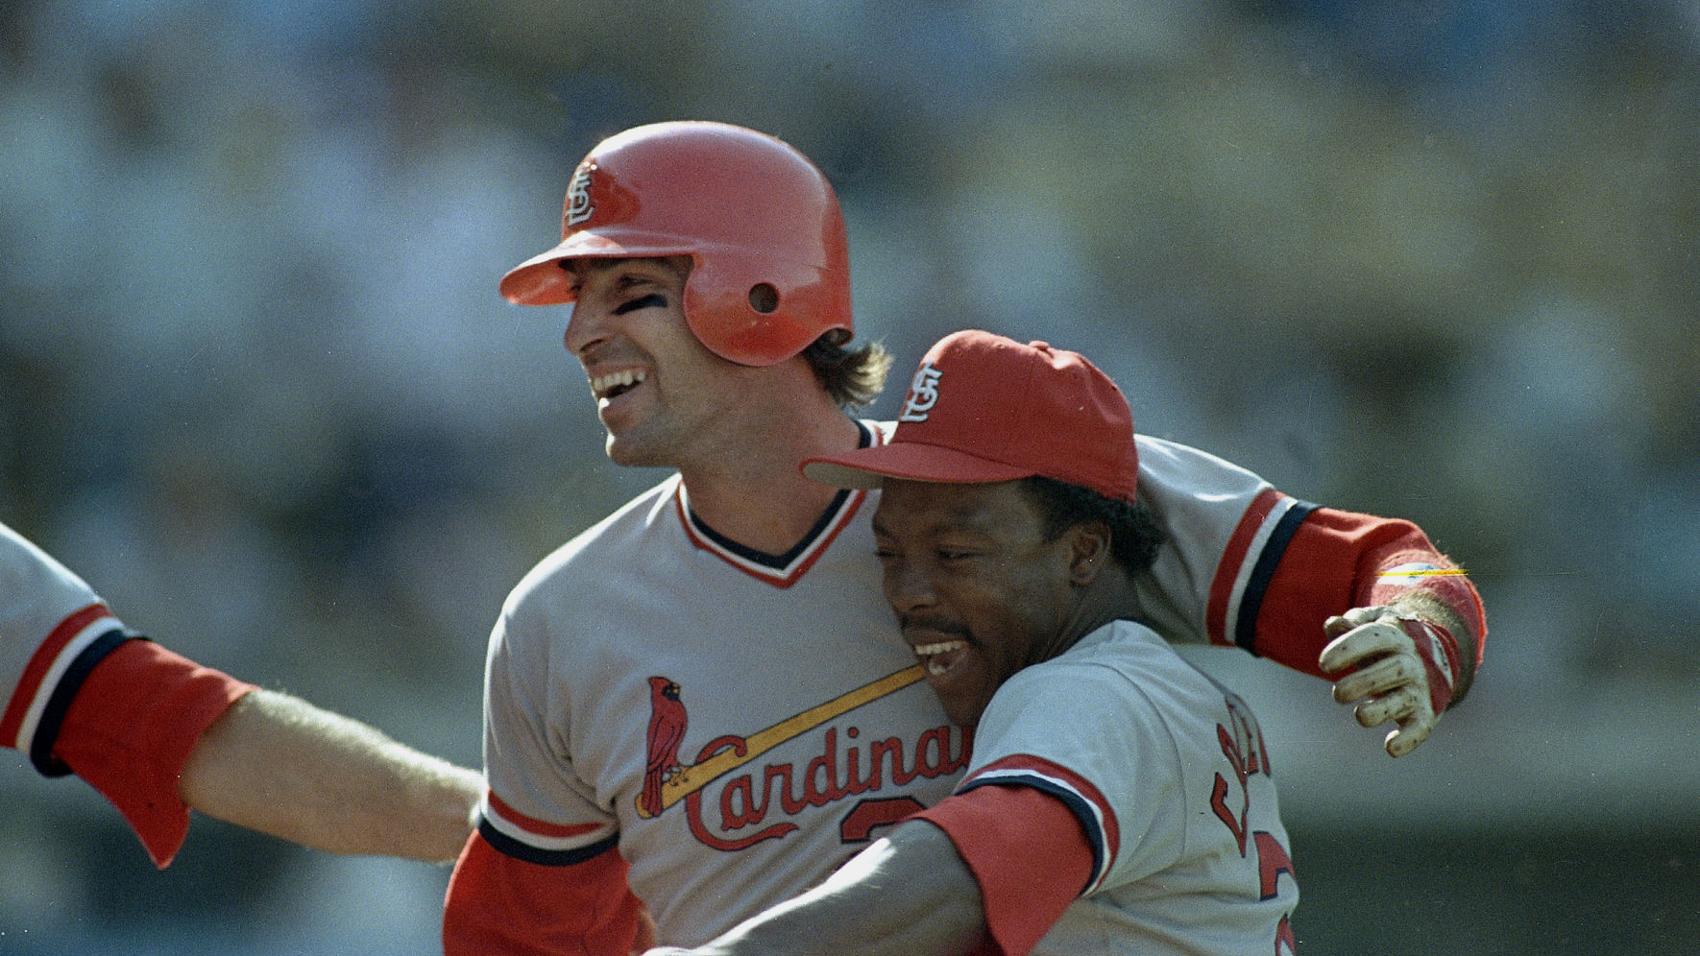 The Cardinals ride Jack Clark's rocket to the World Series